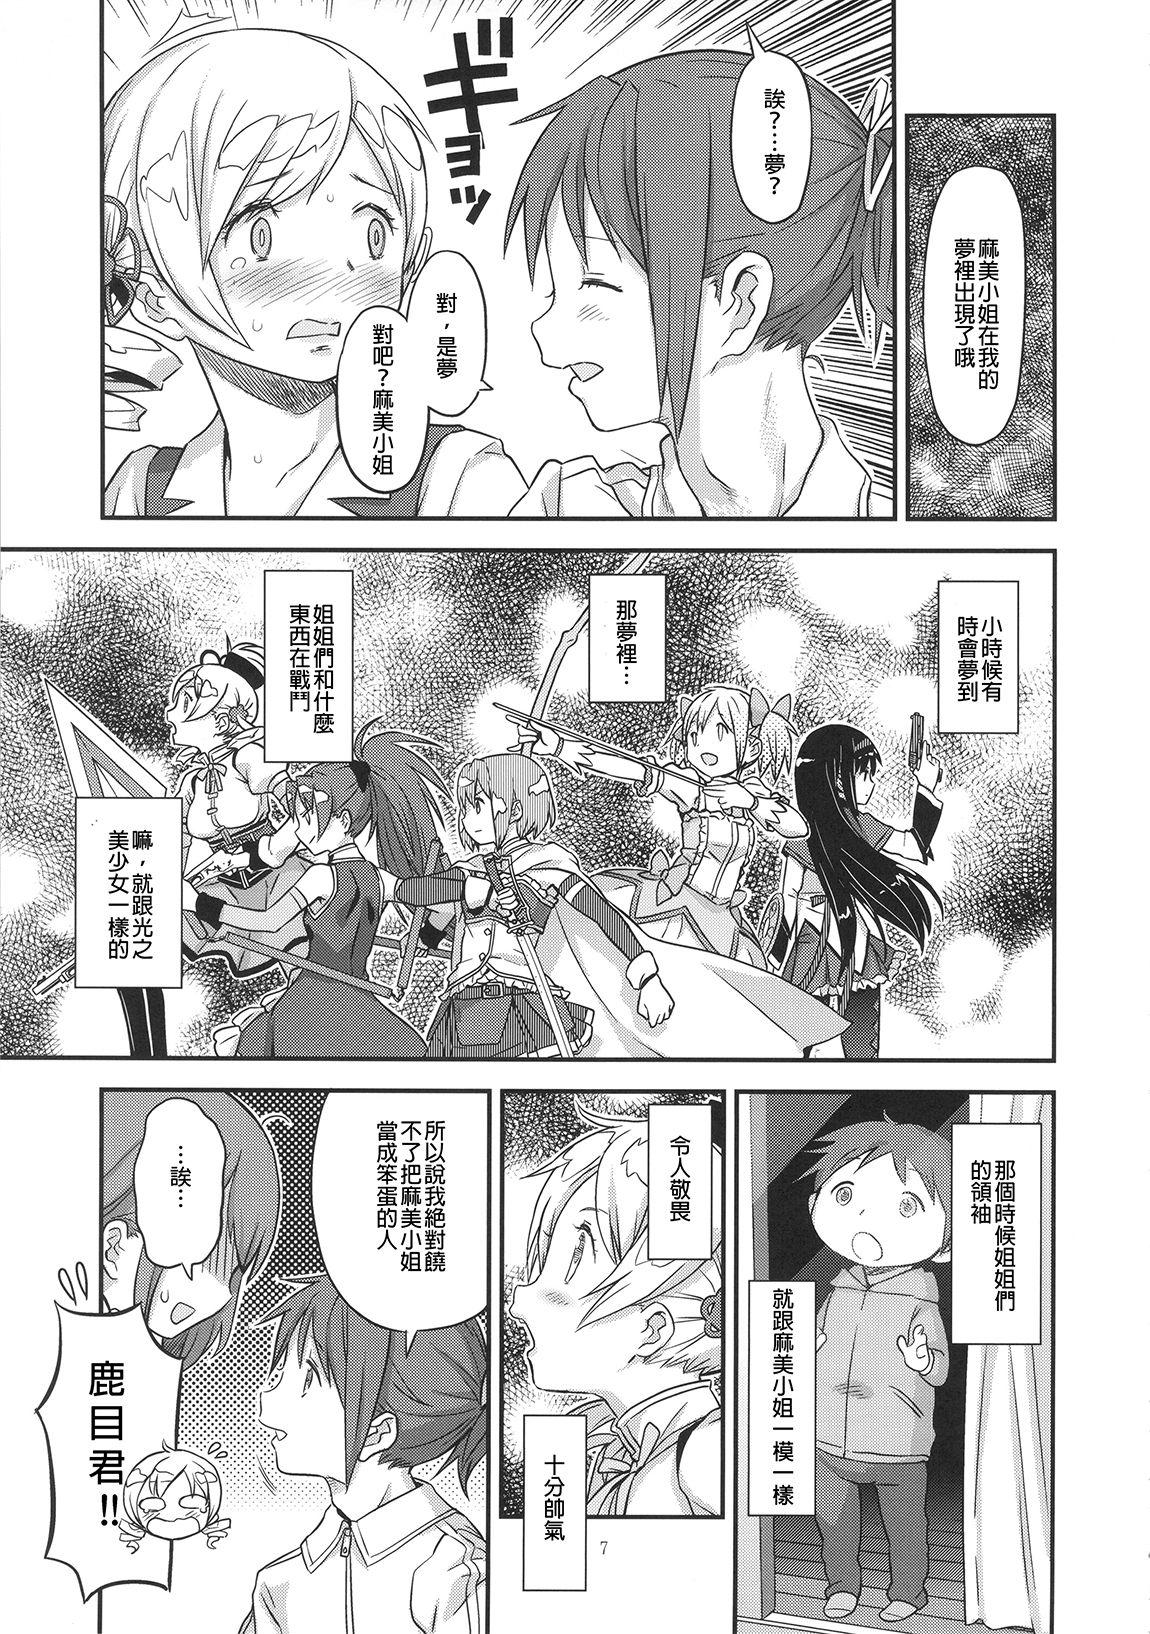 Young Old Its Time to Fall? SIDE:M - Puella magi madoka magica Blow Job - Page 7